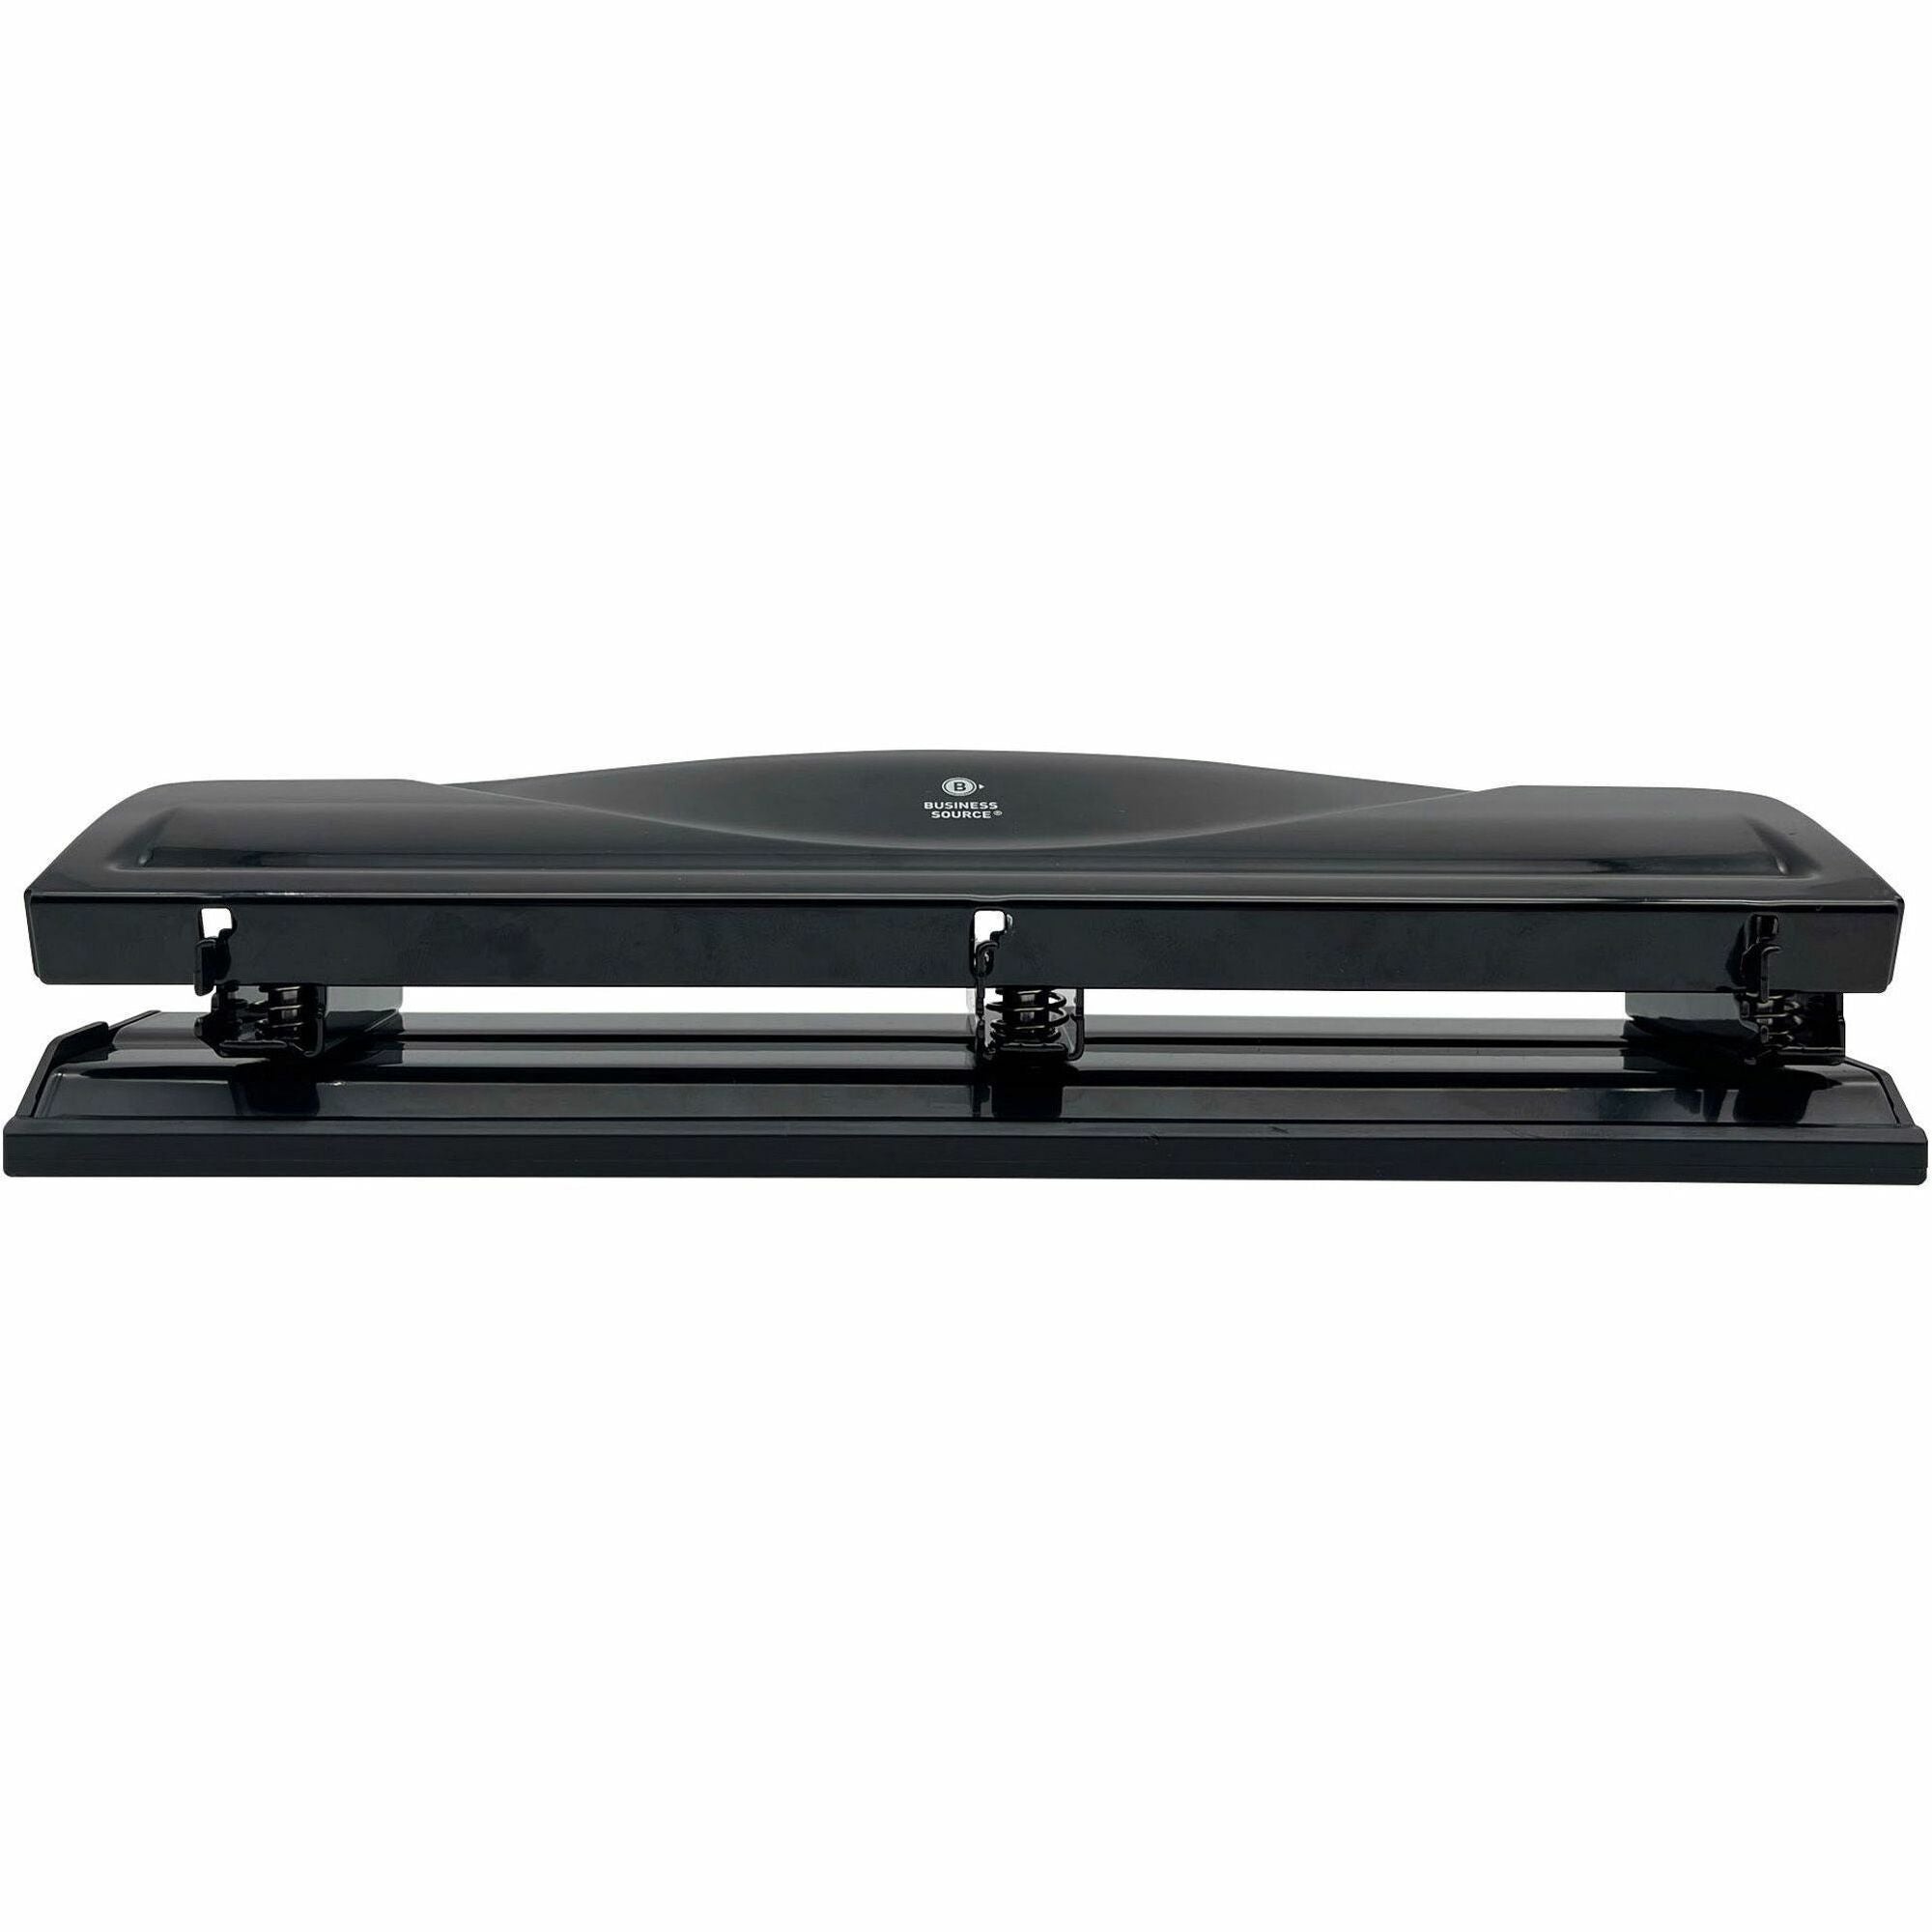 business-source-nonadjustable-3-hole-punch-10-sheet-1-4-punch-size-round-shape-black_bsn65655 - 1